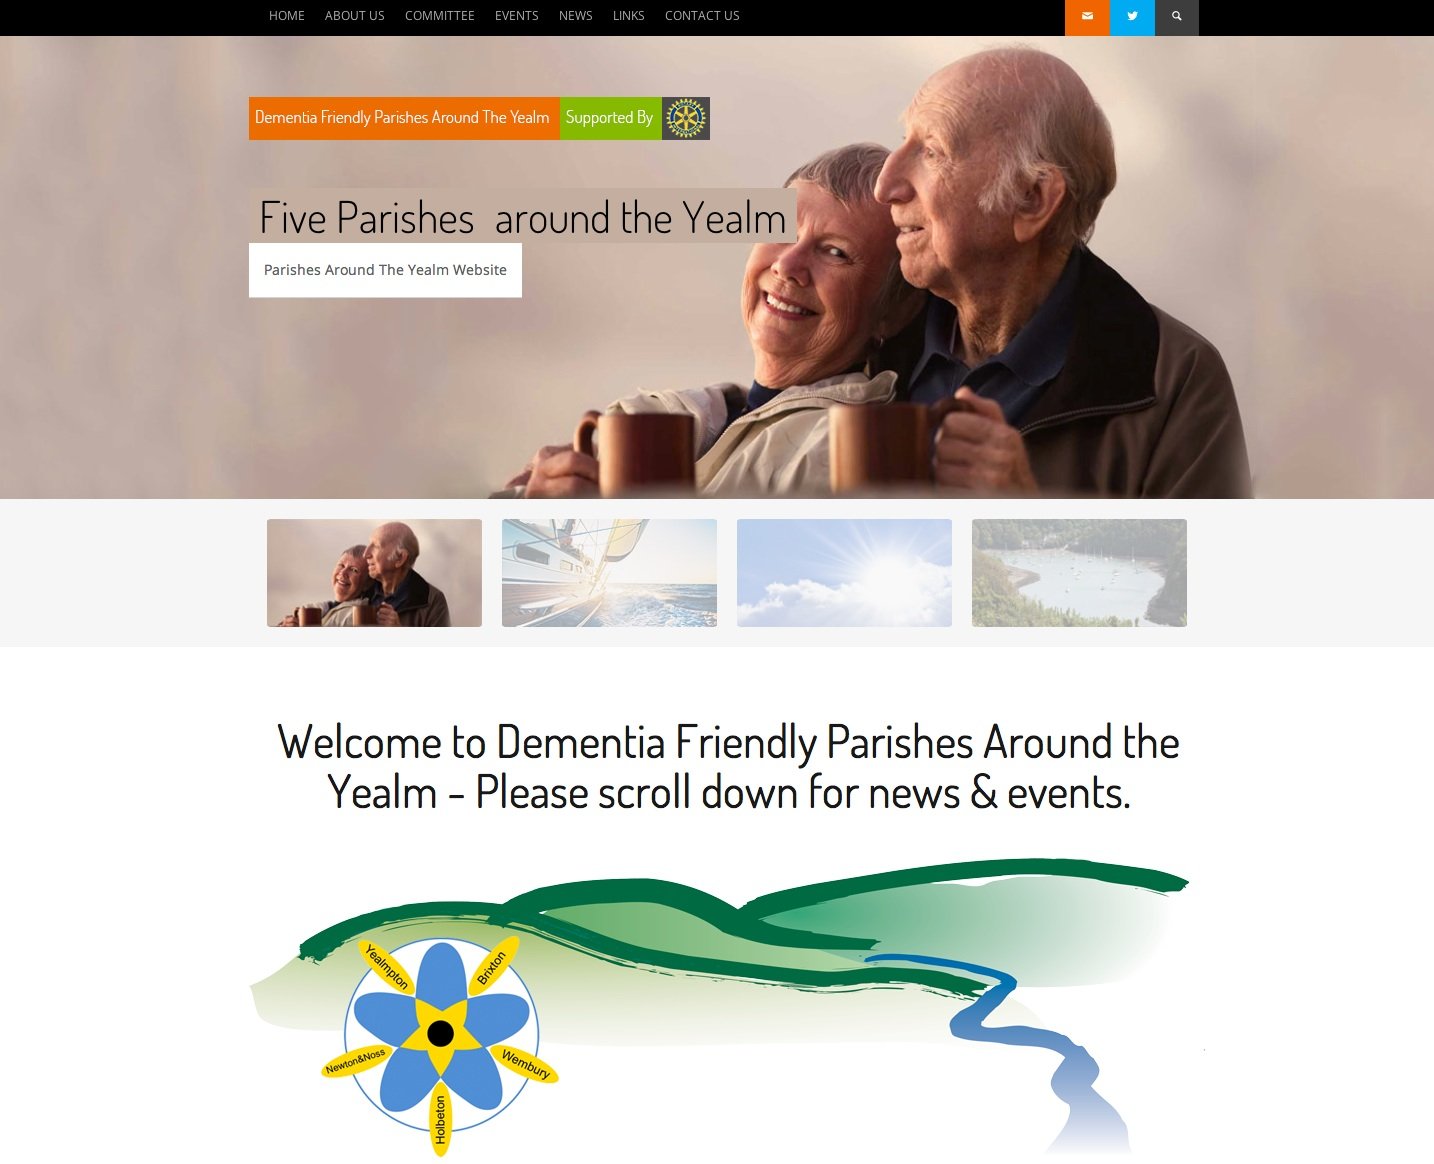 Dementia Friendly Parishes in the Yealm Launch